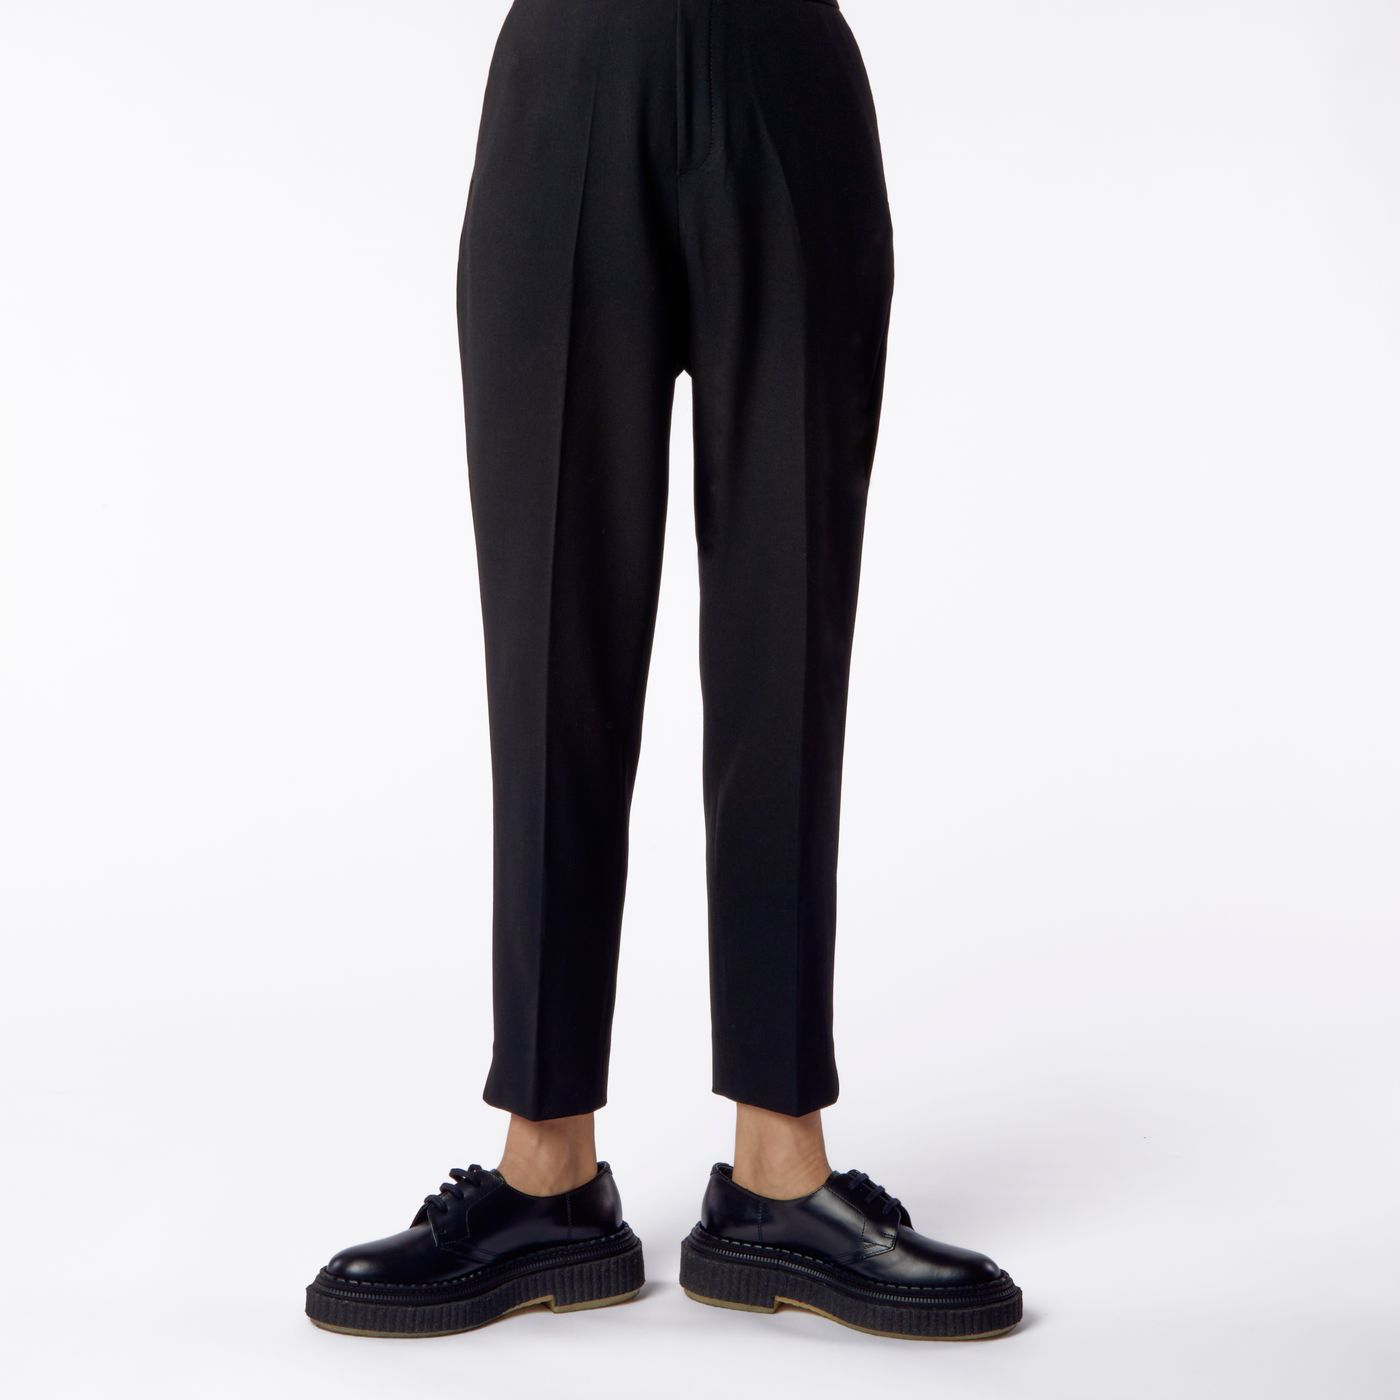 Black Trousers - Buy Black Trousers Online in India-anthinhphatland.vn